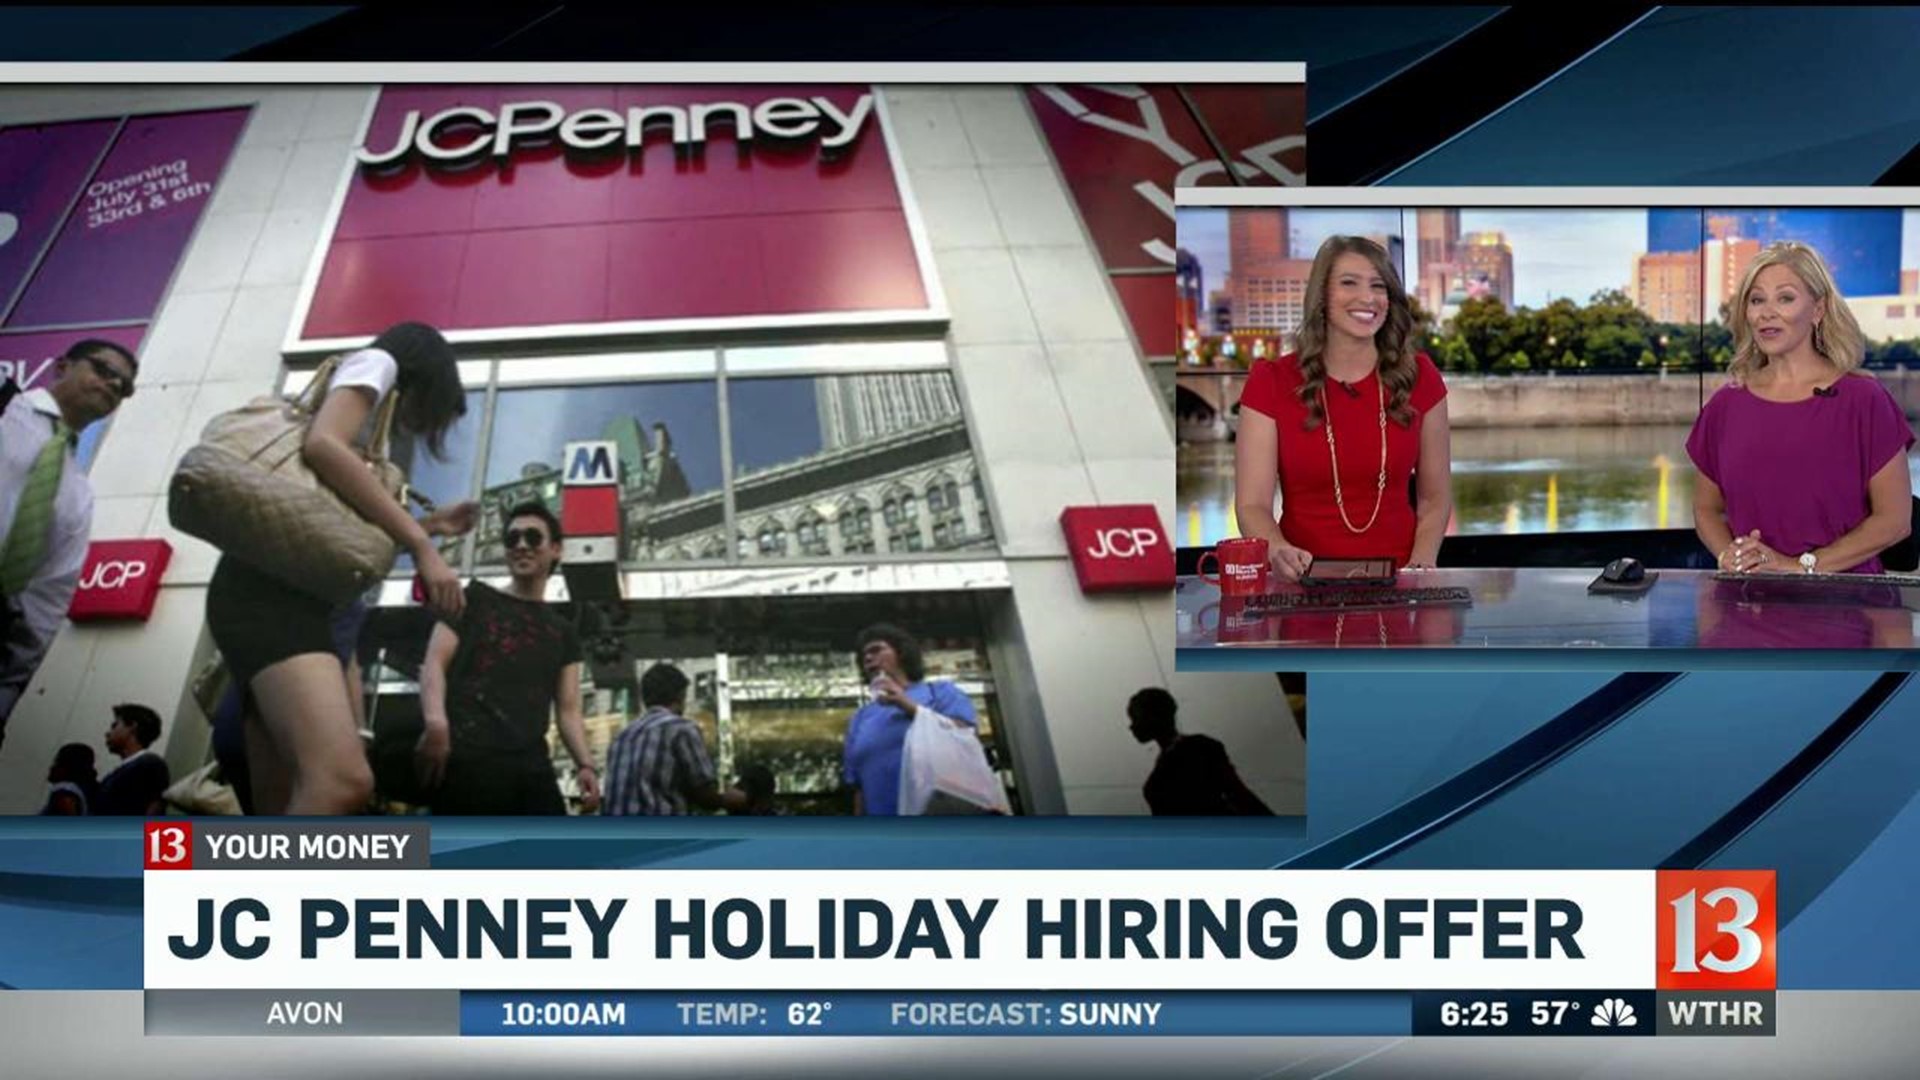 JCPenney holiday hiring offer